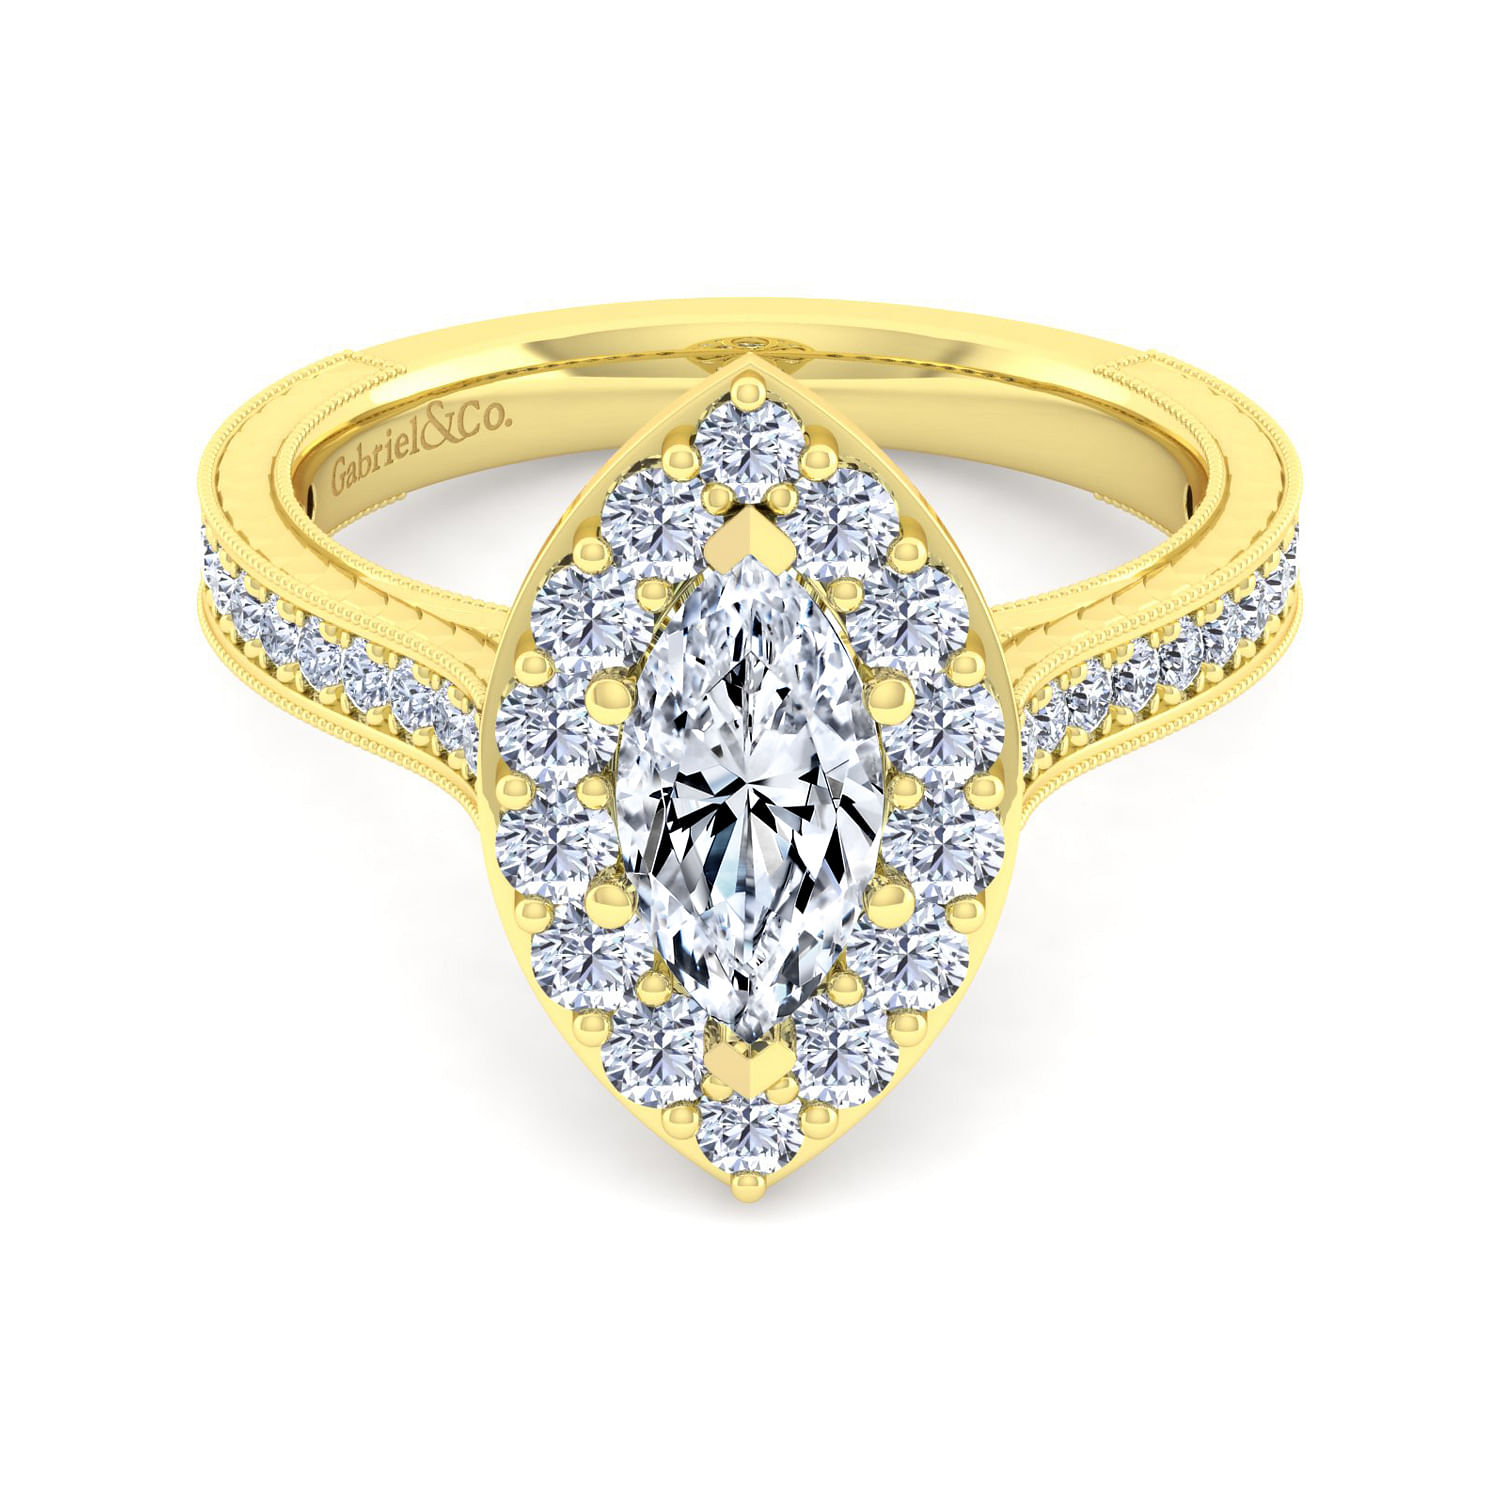 Vintage Inspired 14K Yellow Gold Marquise Halo Diamond Engagement Ring